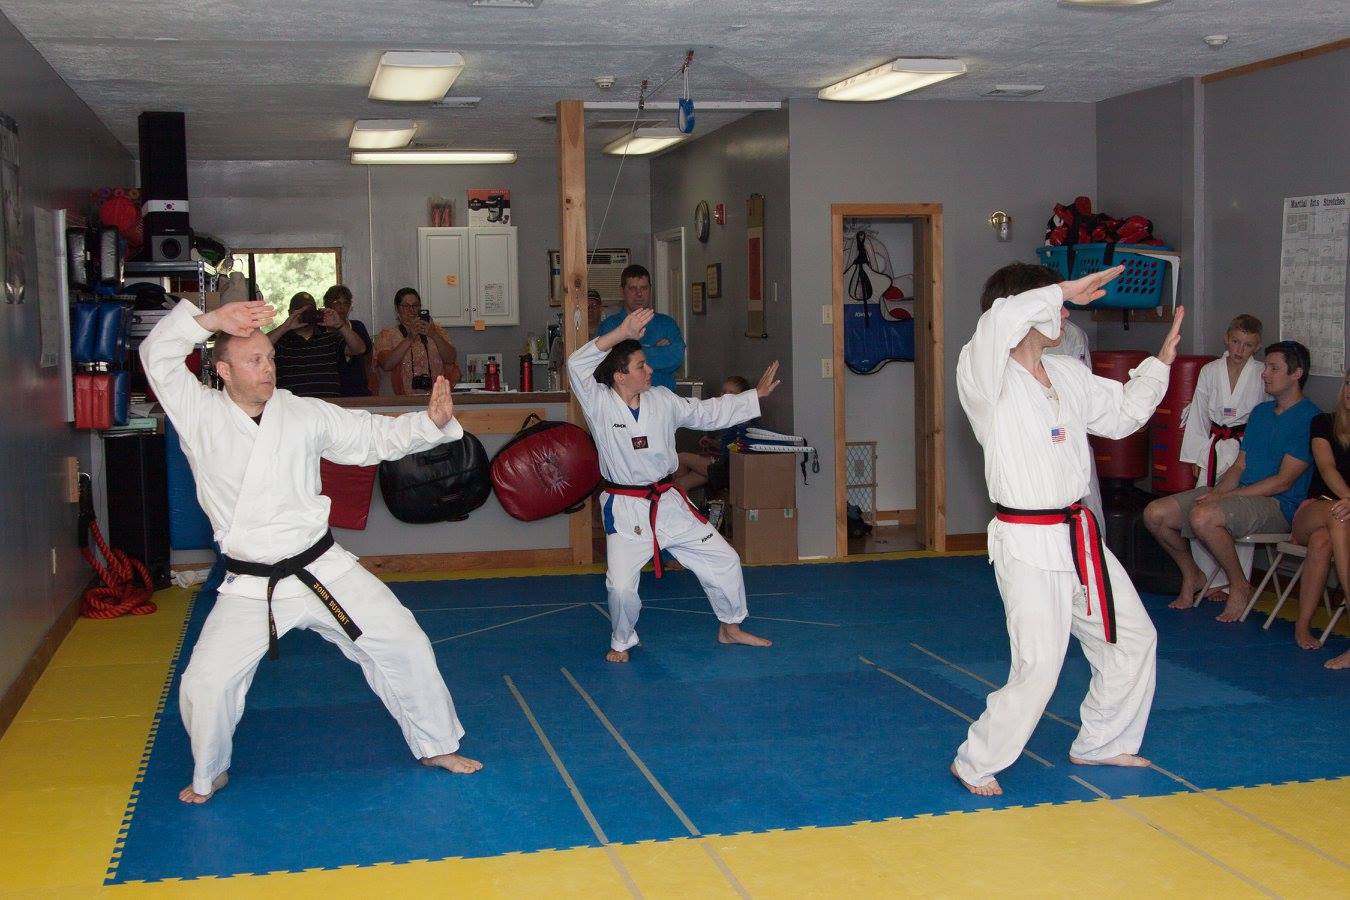 Arrowhead Martial Arts and Fitness 49 Middle Rd #5, Milton Vermont 05468